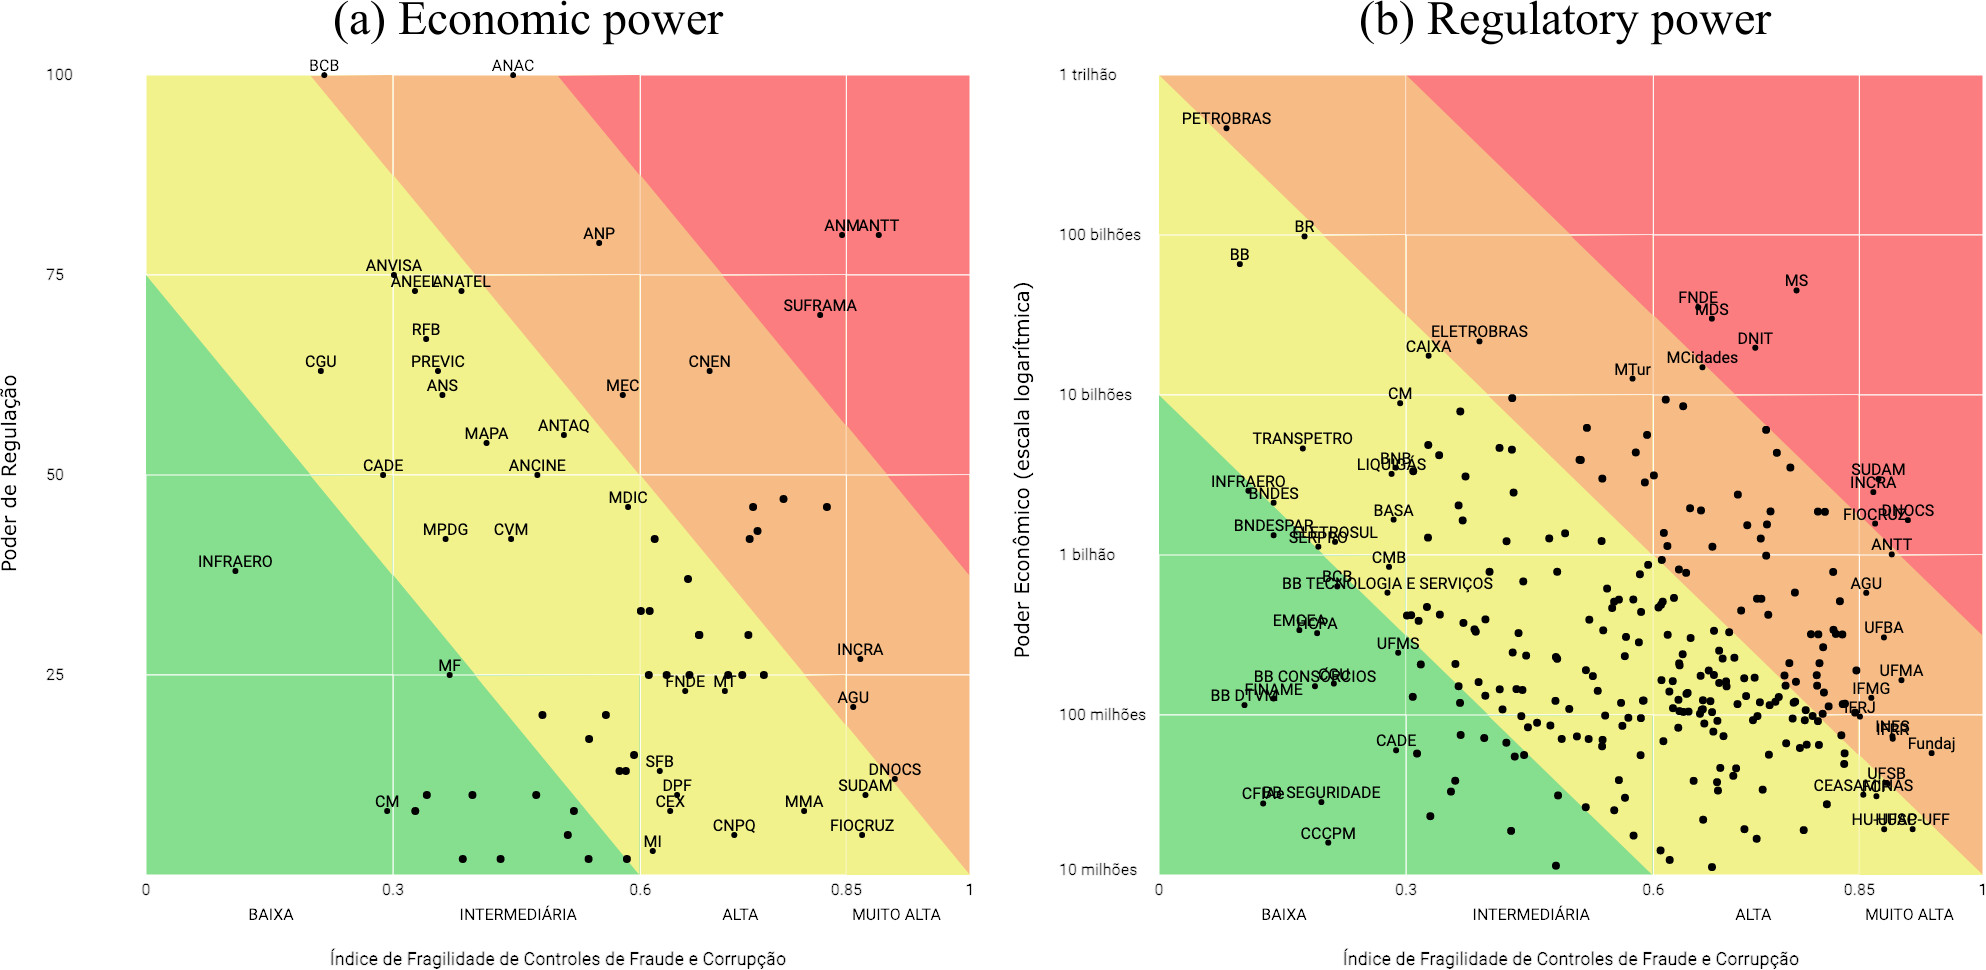 Mapping of Weakness of controls vs economic power and regulatory power. Source: https://meapffc.apps.tcu.gov.br. Note: Horizontal Axis: Fraud and Corruption Controls Weakness Index (0 – low …1 – very high). Vertical Axis (panel a): Economic power (10 million to 1 trillion, log scale). Vertical Axis (panel B): Regulatory Power (0–100).